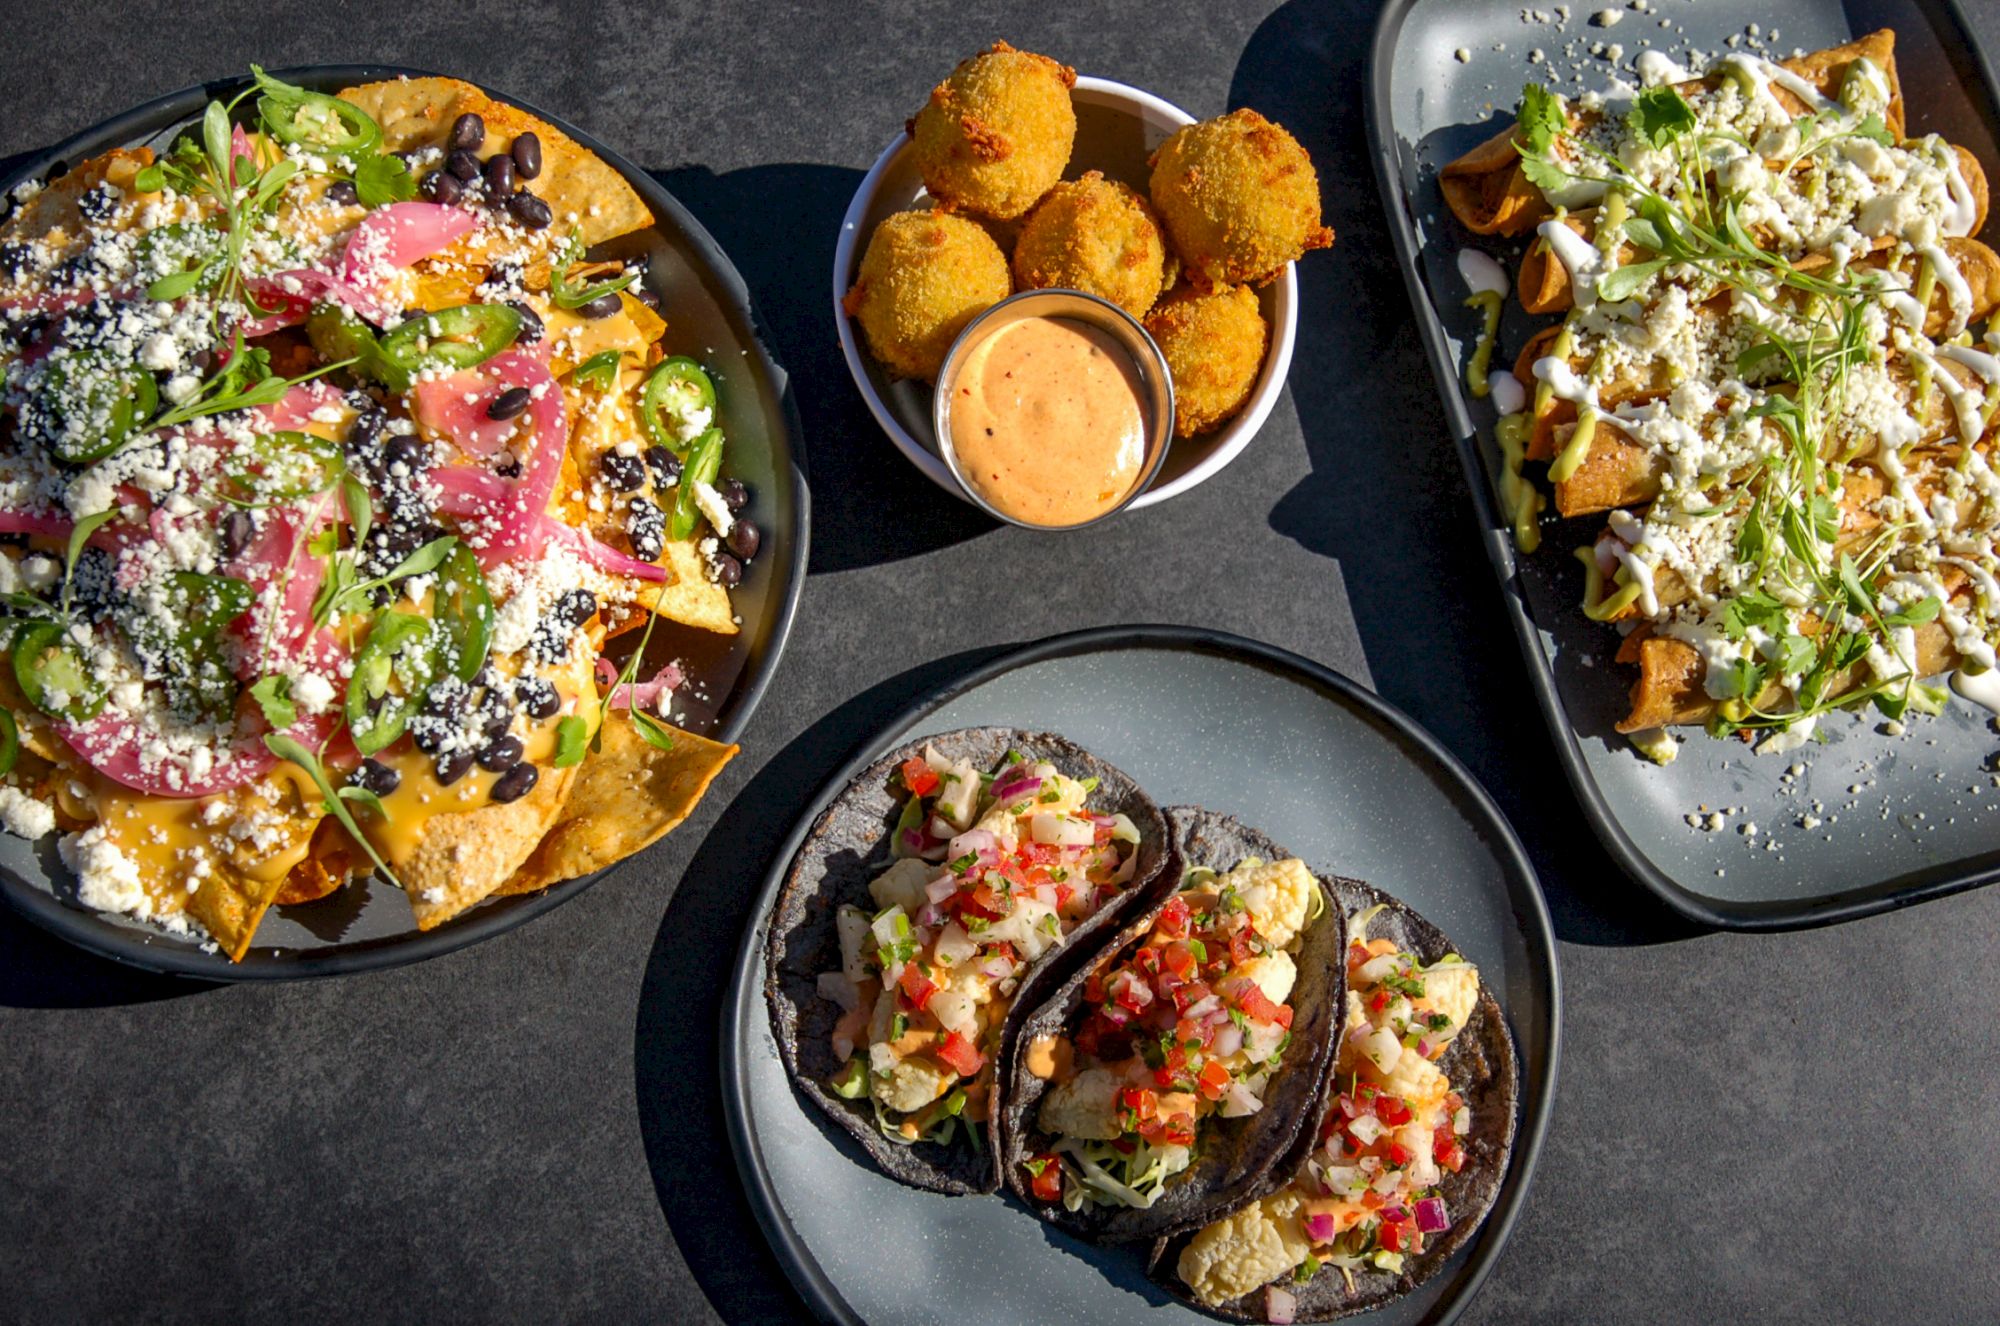 The image shows a spread of Mexican dishes, including nachos, tacos, croquettes, and a plate of loaded fries with dipping sauce in the center.